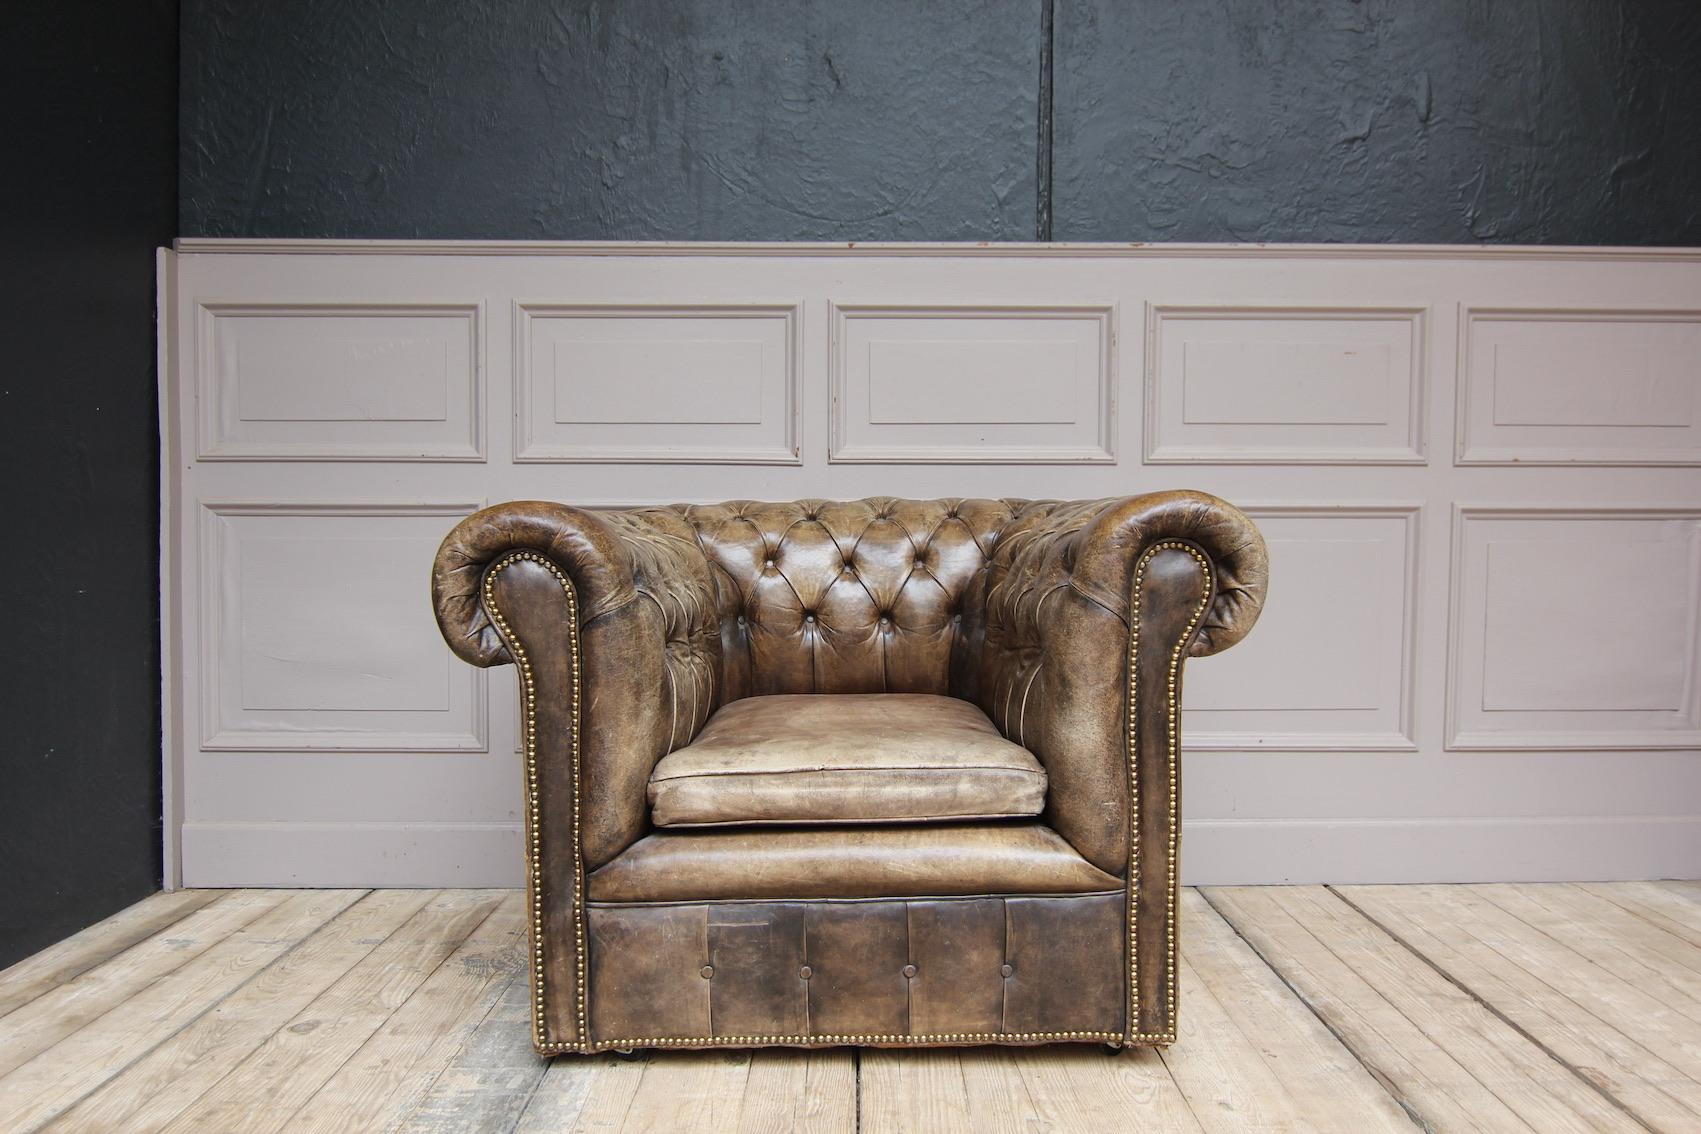 A vintage chesterfield armchair in cowhide with beautiful patina.

Dimensions: 76 cm high, 110 cm wide, 95 cm deep; seat height: 40 cm.